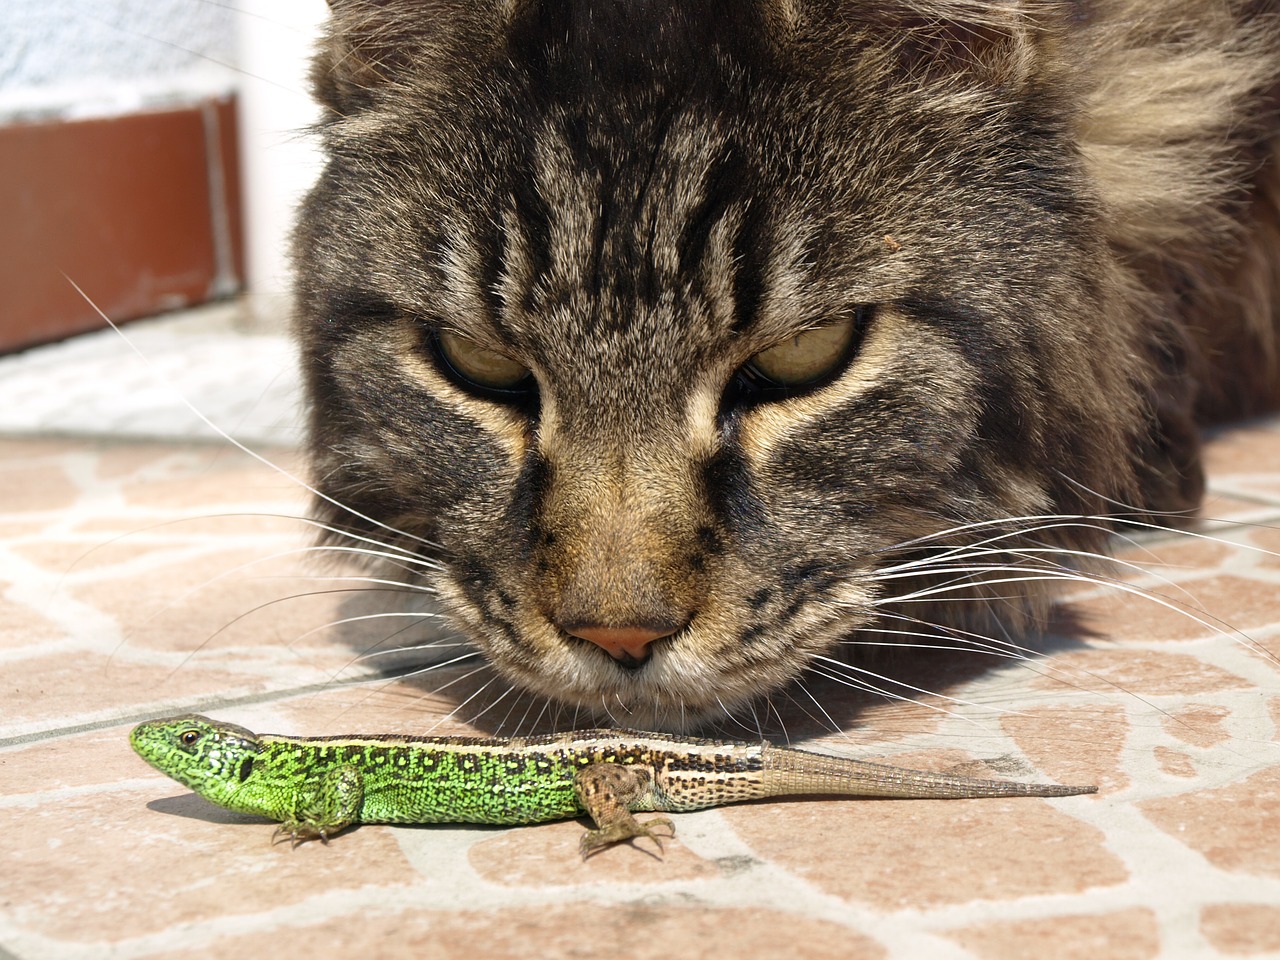 cat the lizard observation free photo